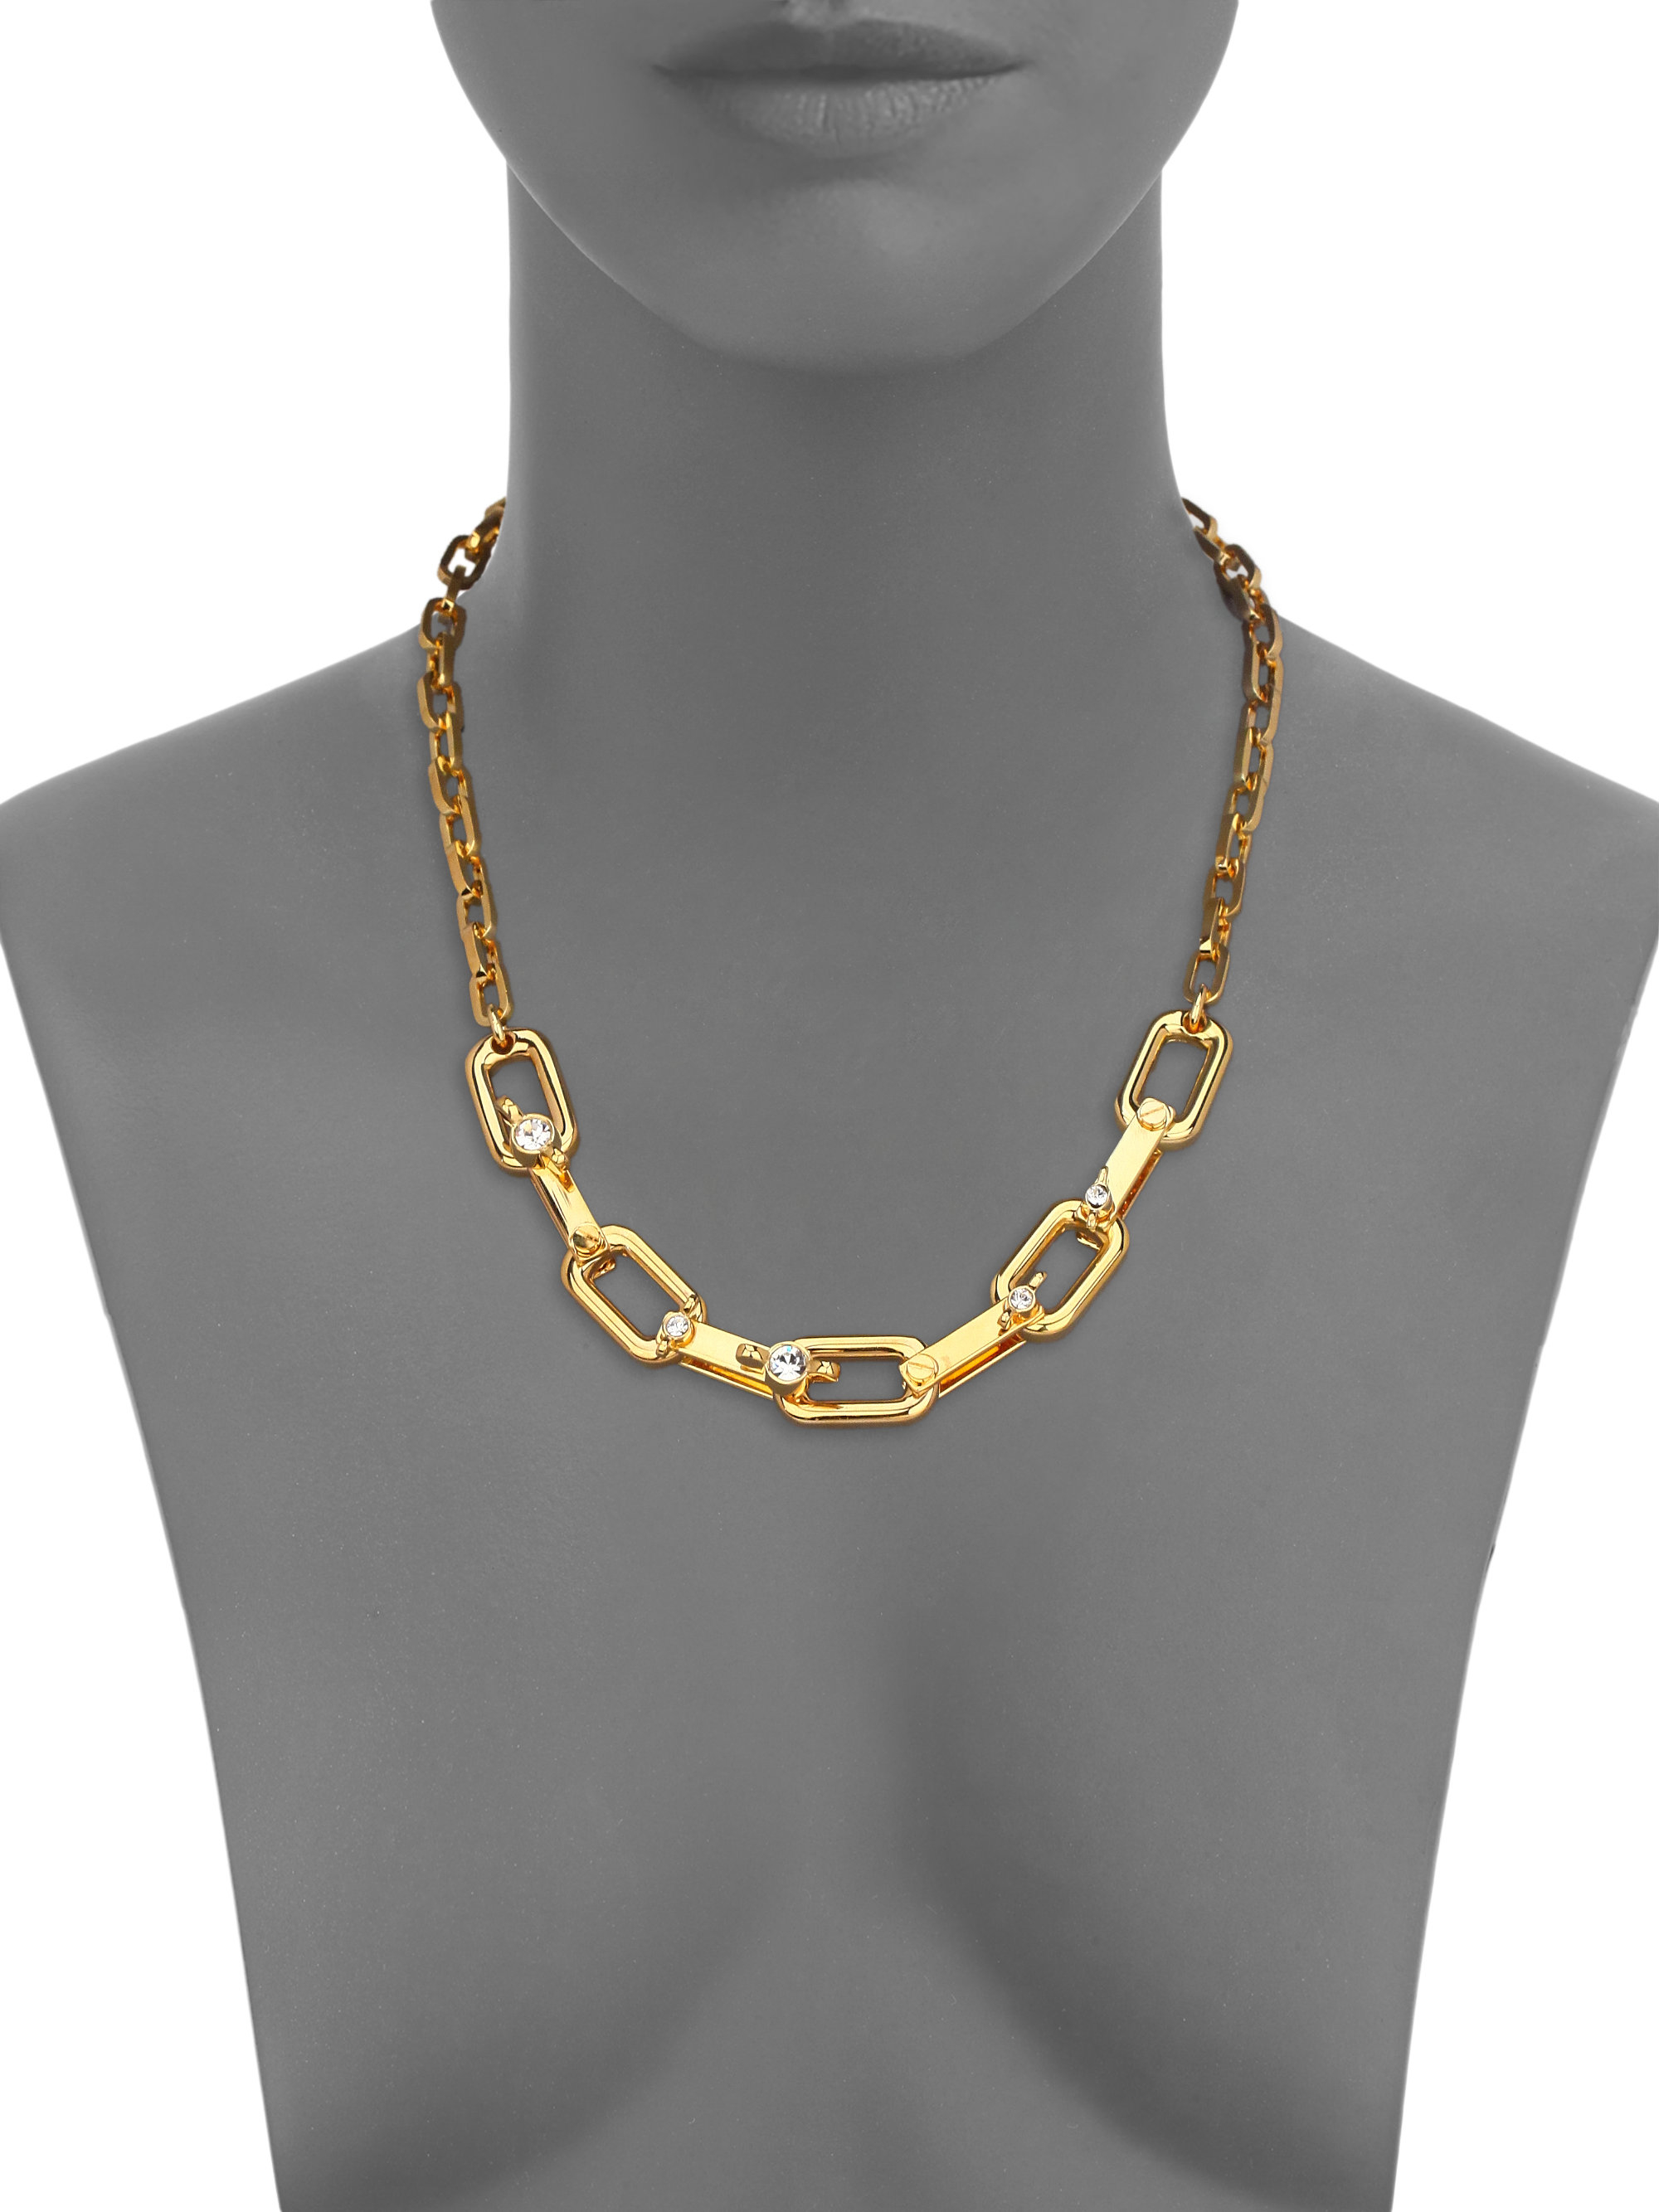 Marc By Marc Jacobs Wing Nut Chain Necklace in Gold (Metallic) - Lyst